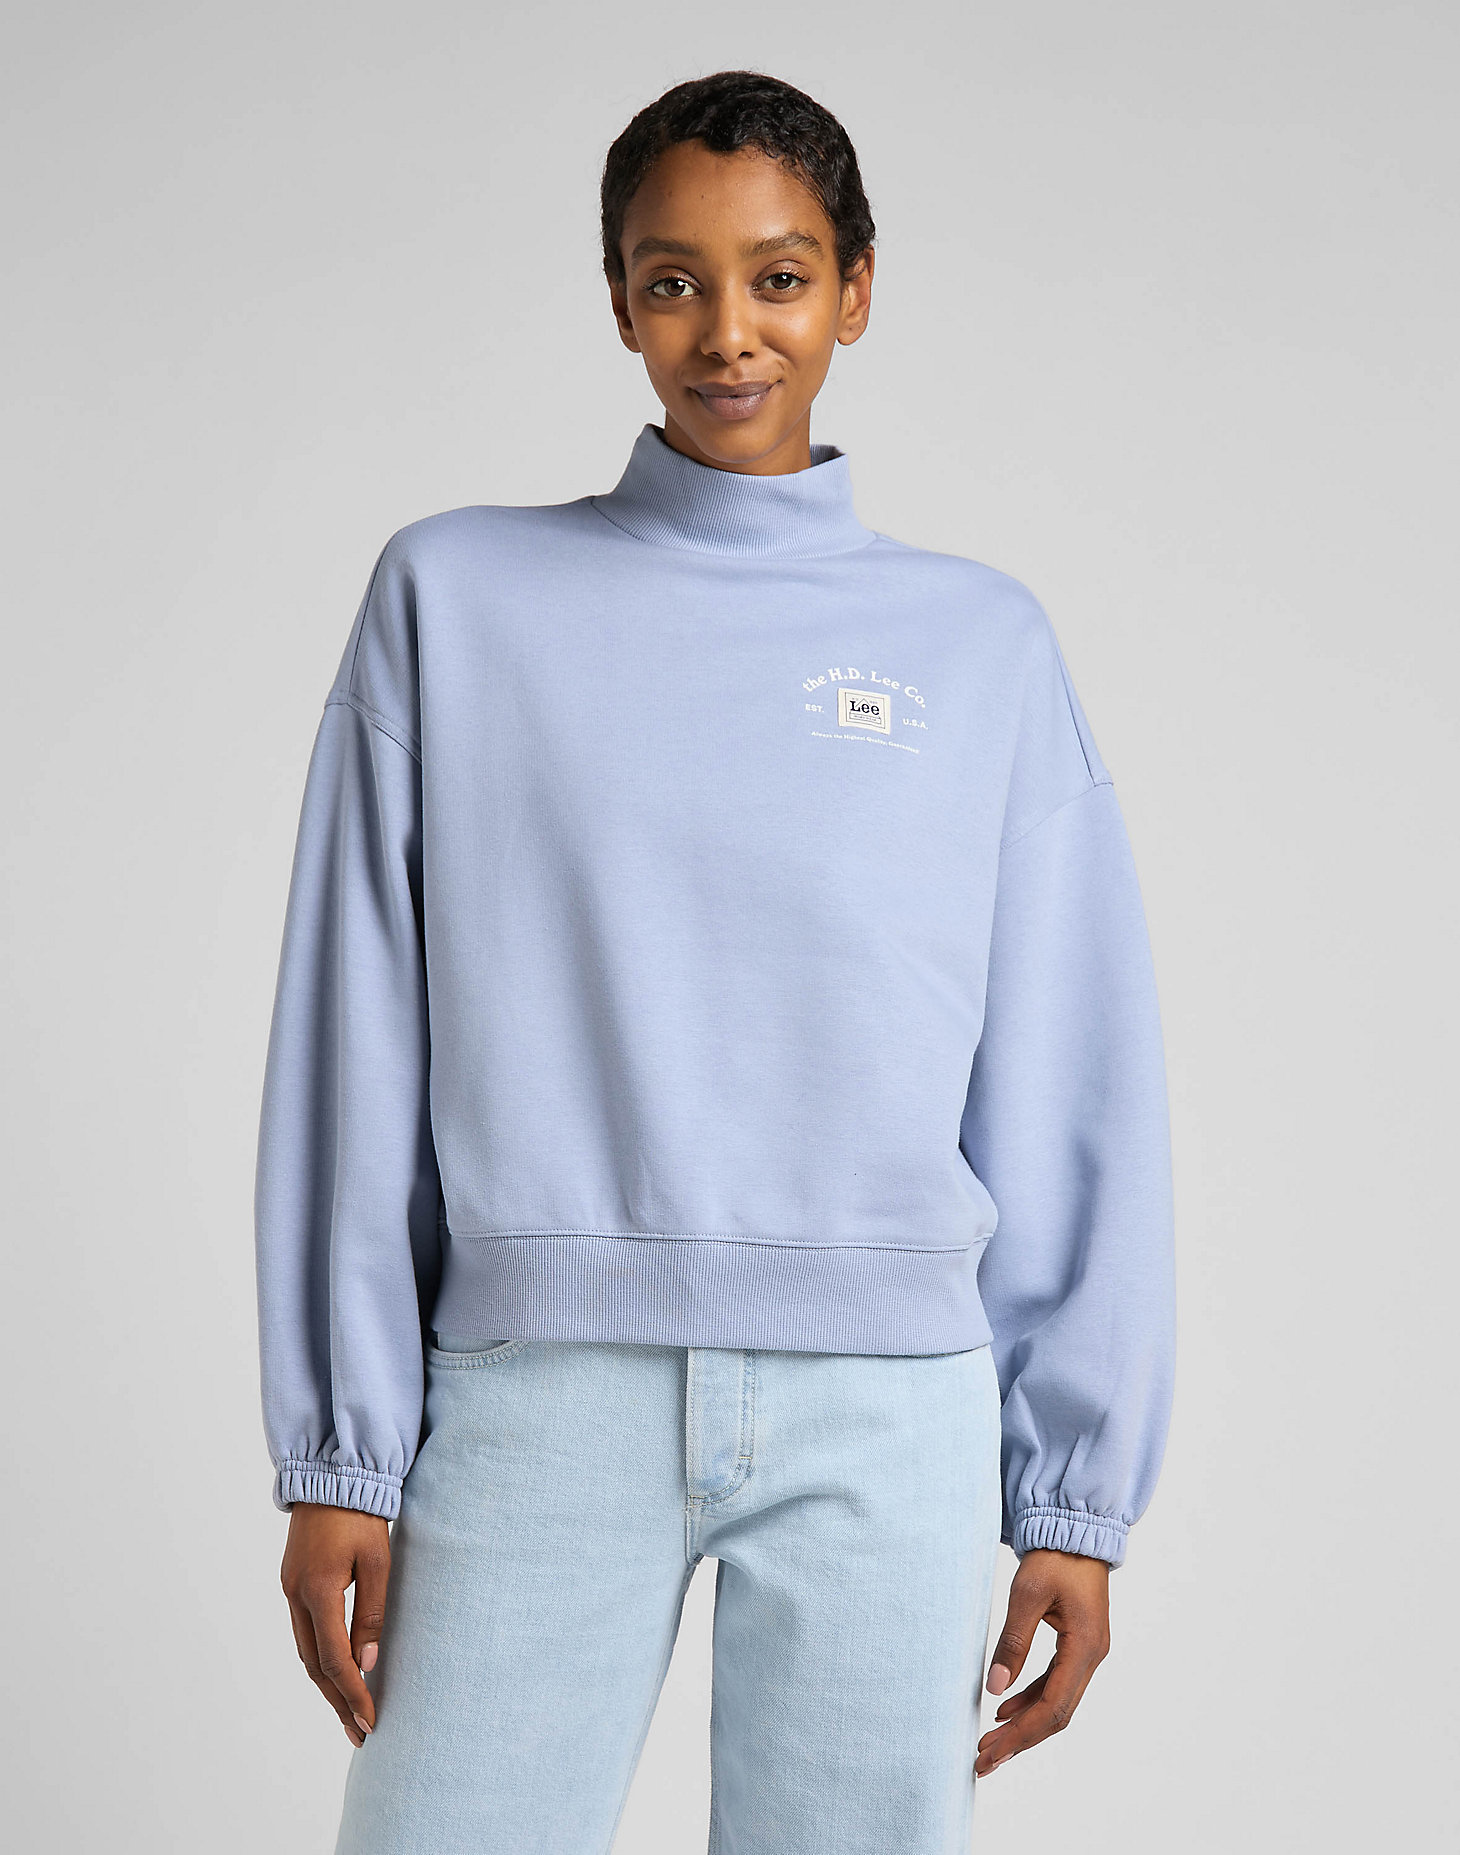 Highneck Volume Sleeve in Parry Blue main view